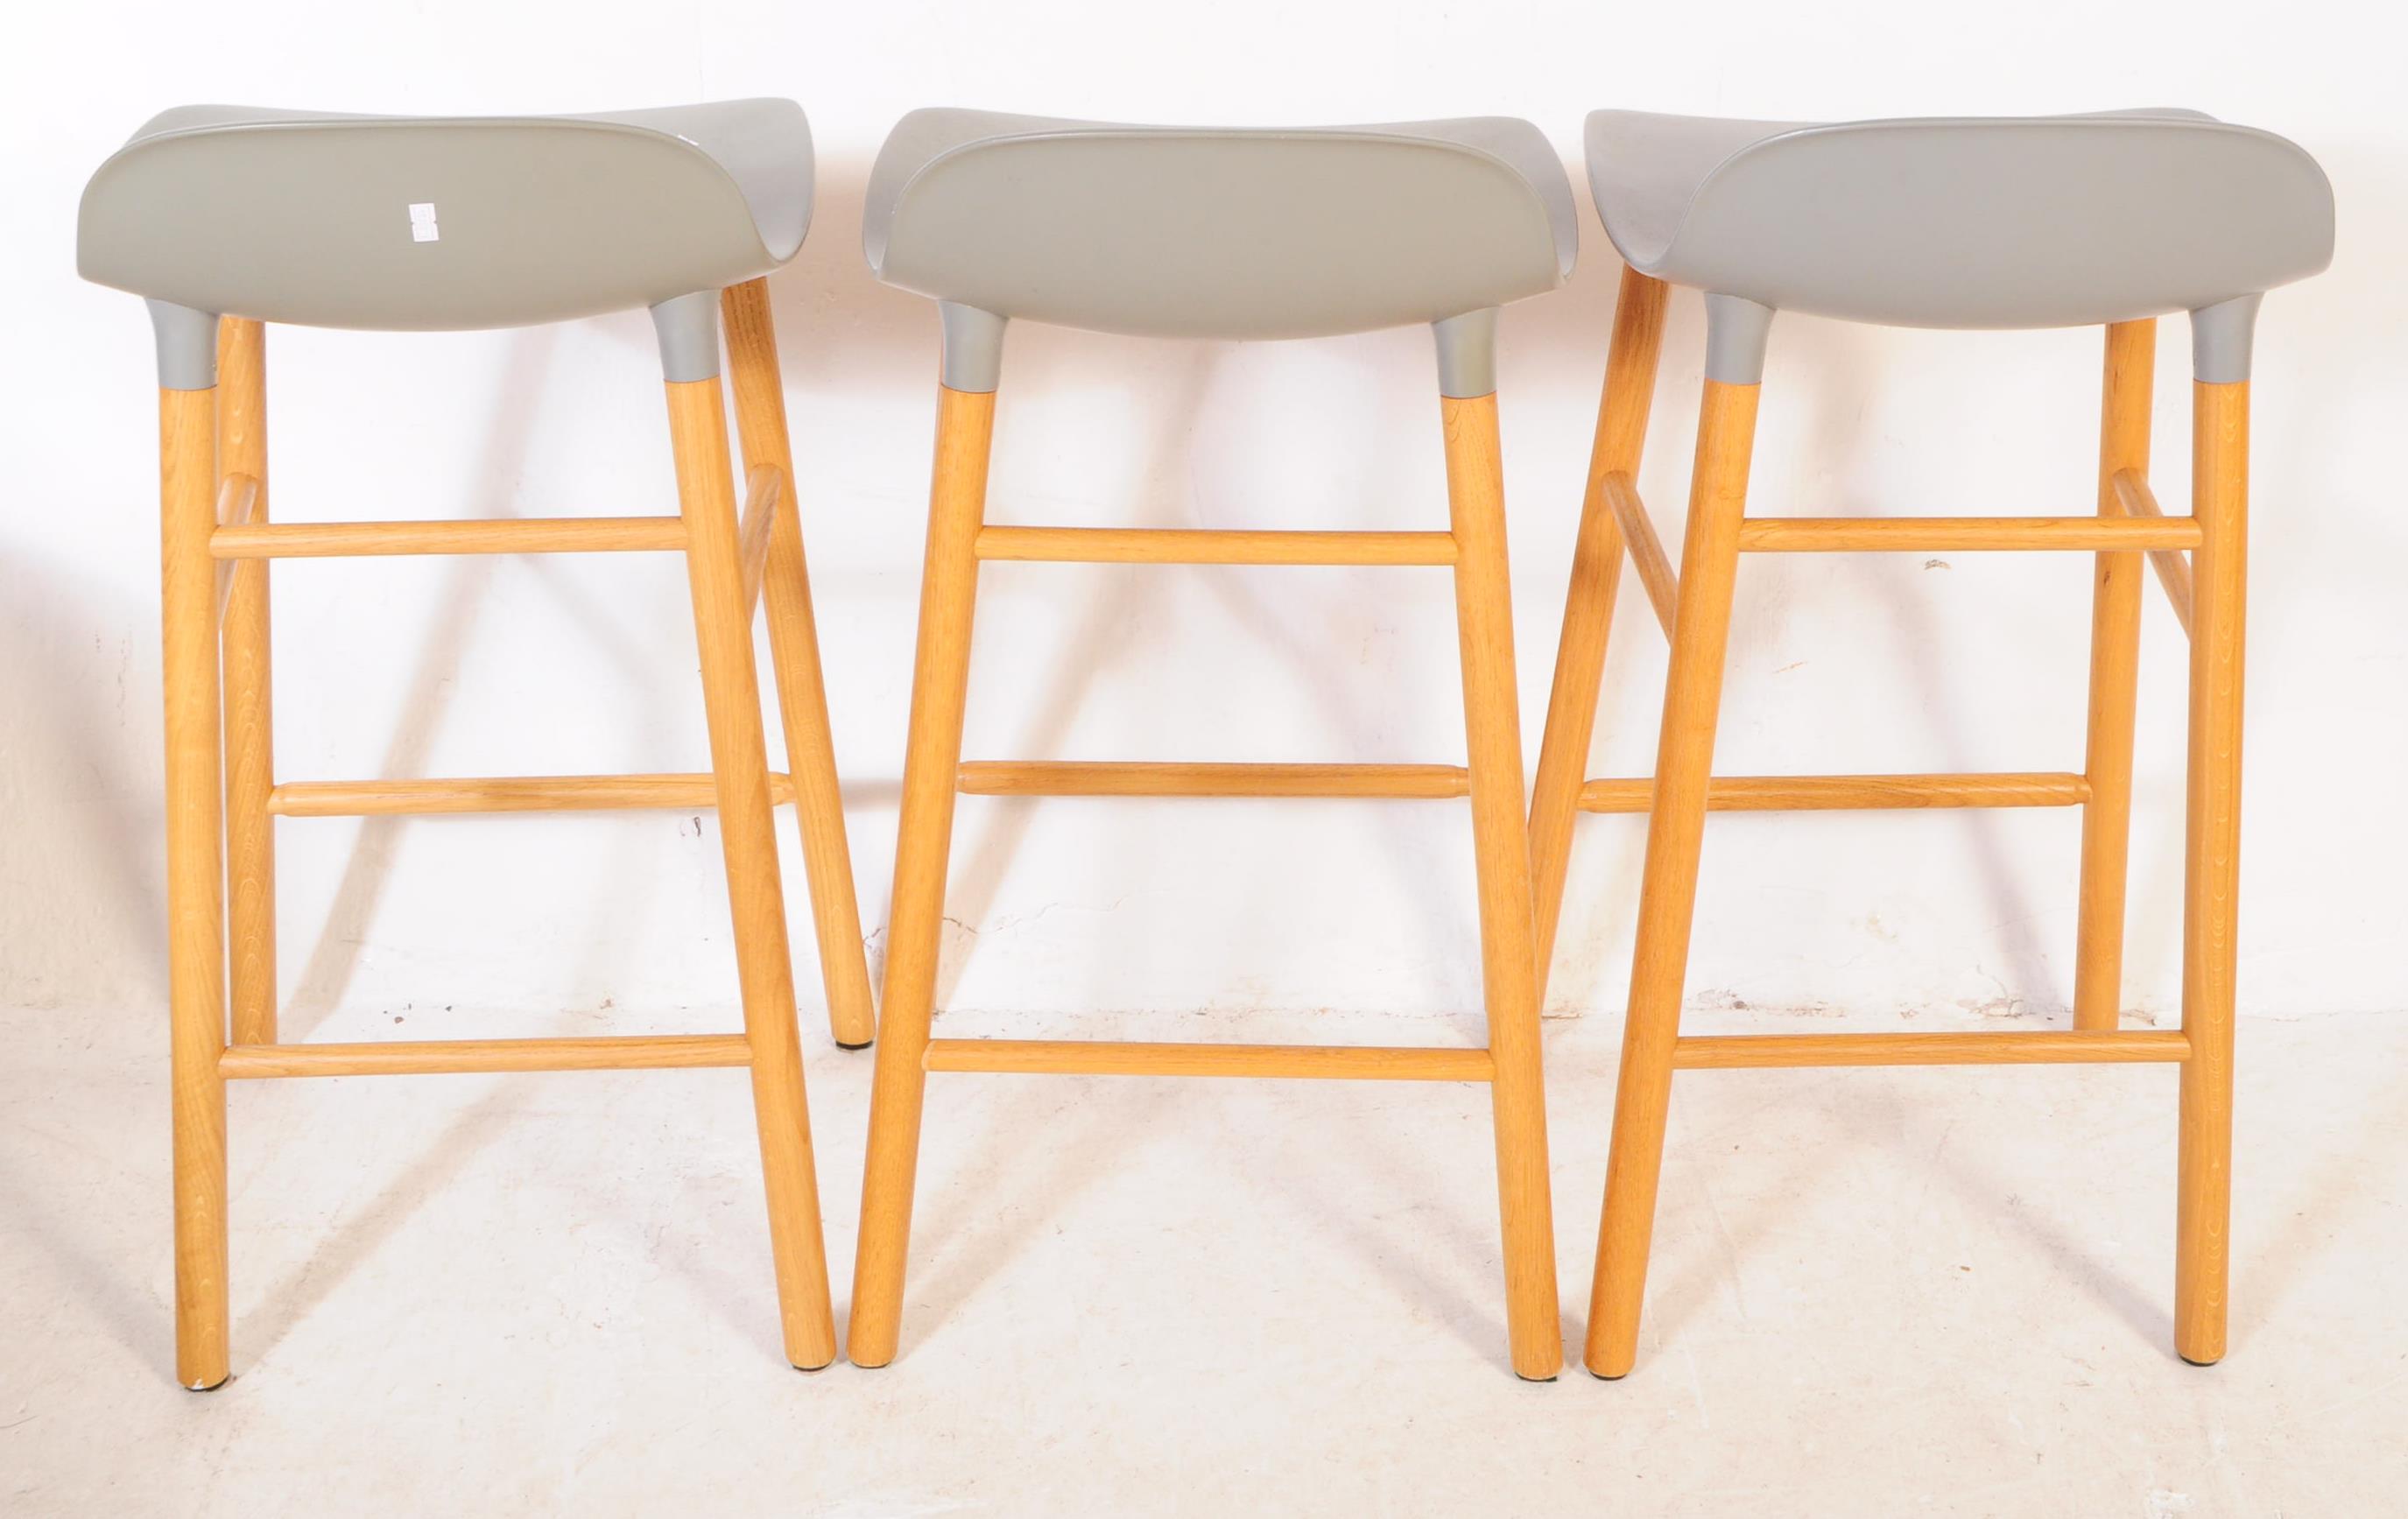 SET OF THREE MODERNIST / CONTEMPORARY KITCHEN BAR STOOLS - Image 4 of 4